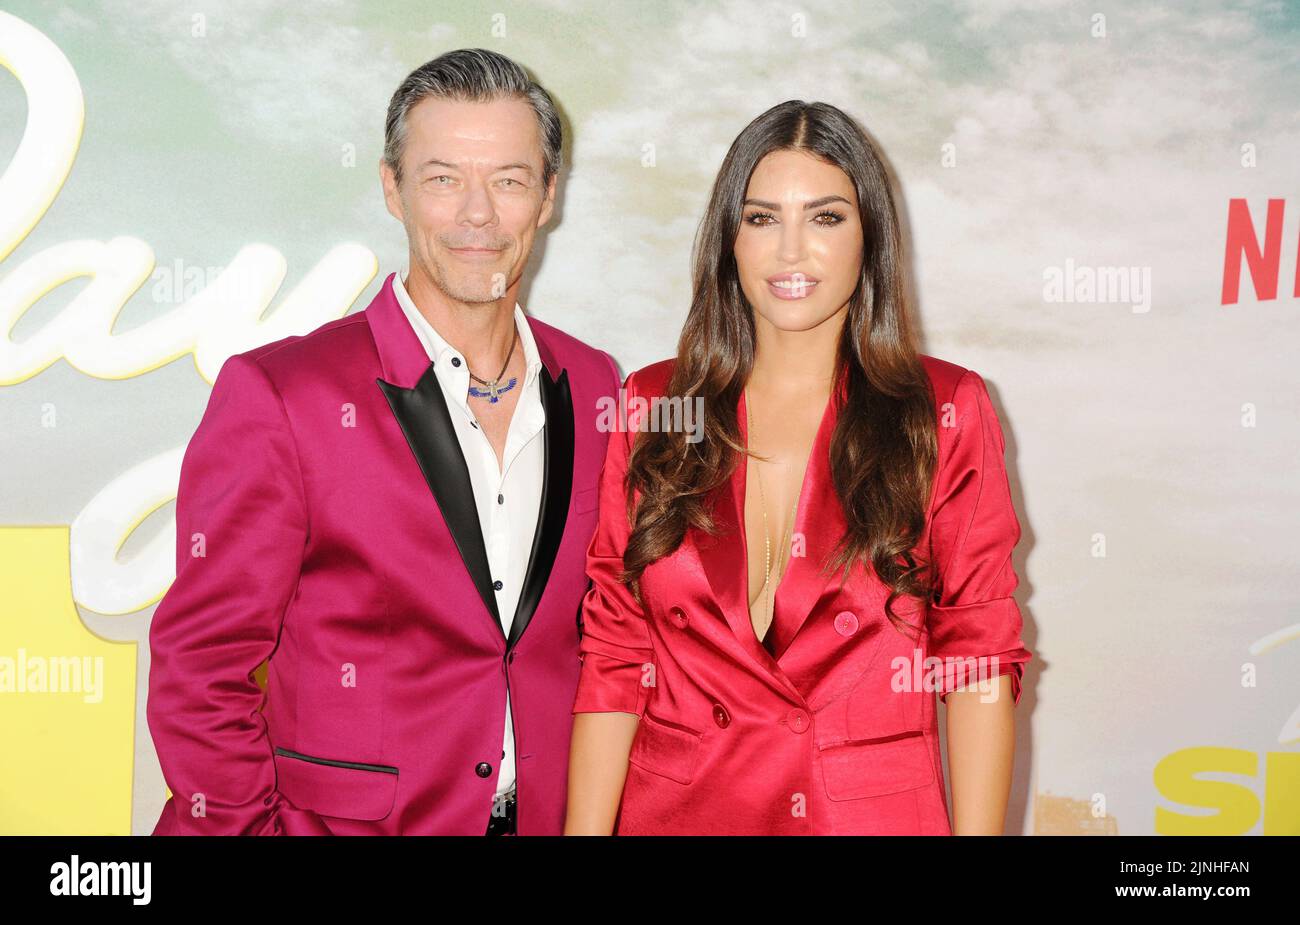 LOS ANGELES, CA - AUGUST 10: (L-R) Massi Furlan and Yolanthe Sneijder-Cabau attend the World Premiere of Netflix's 'Day Shift' at Regal LA Live on Aug Stock Photo